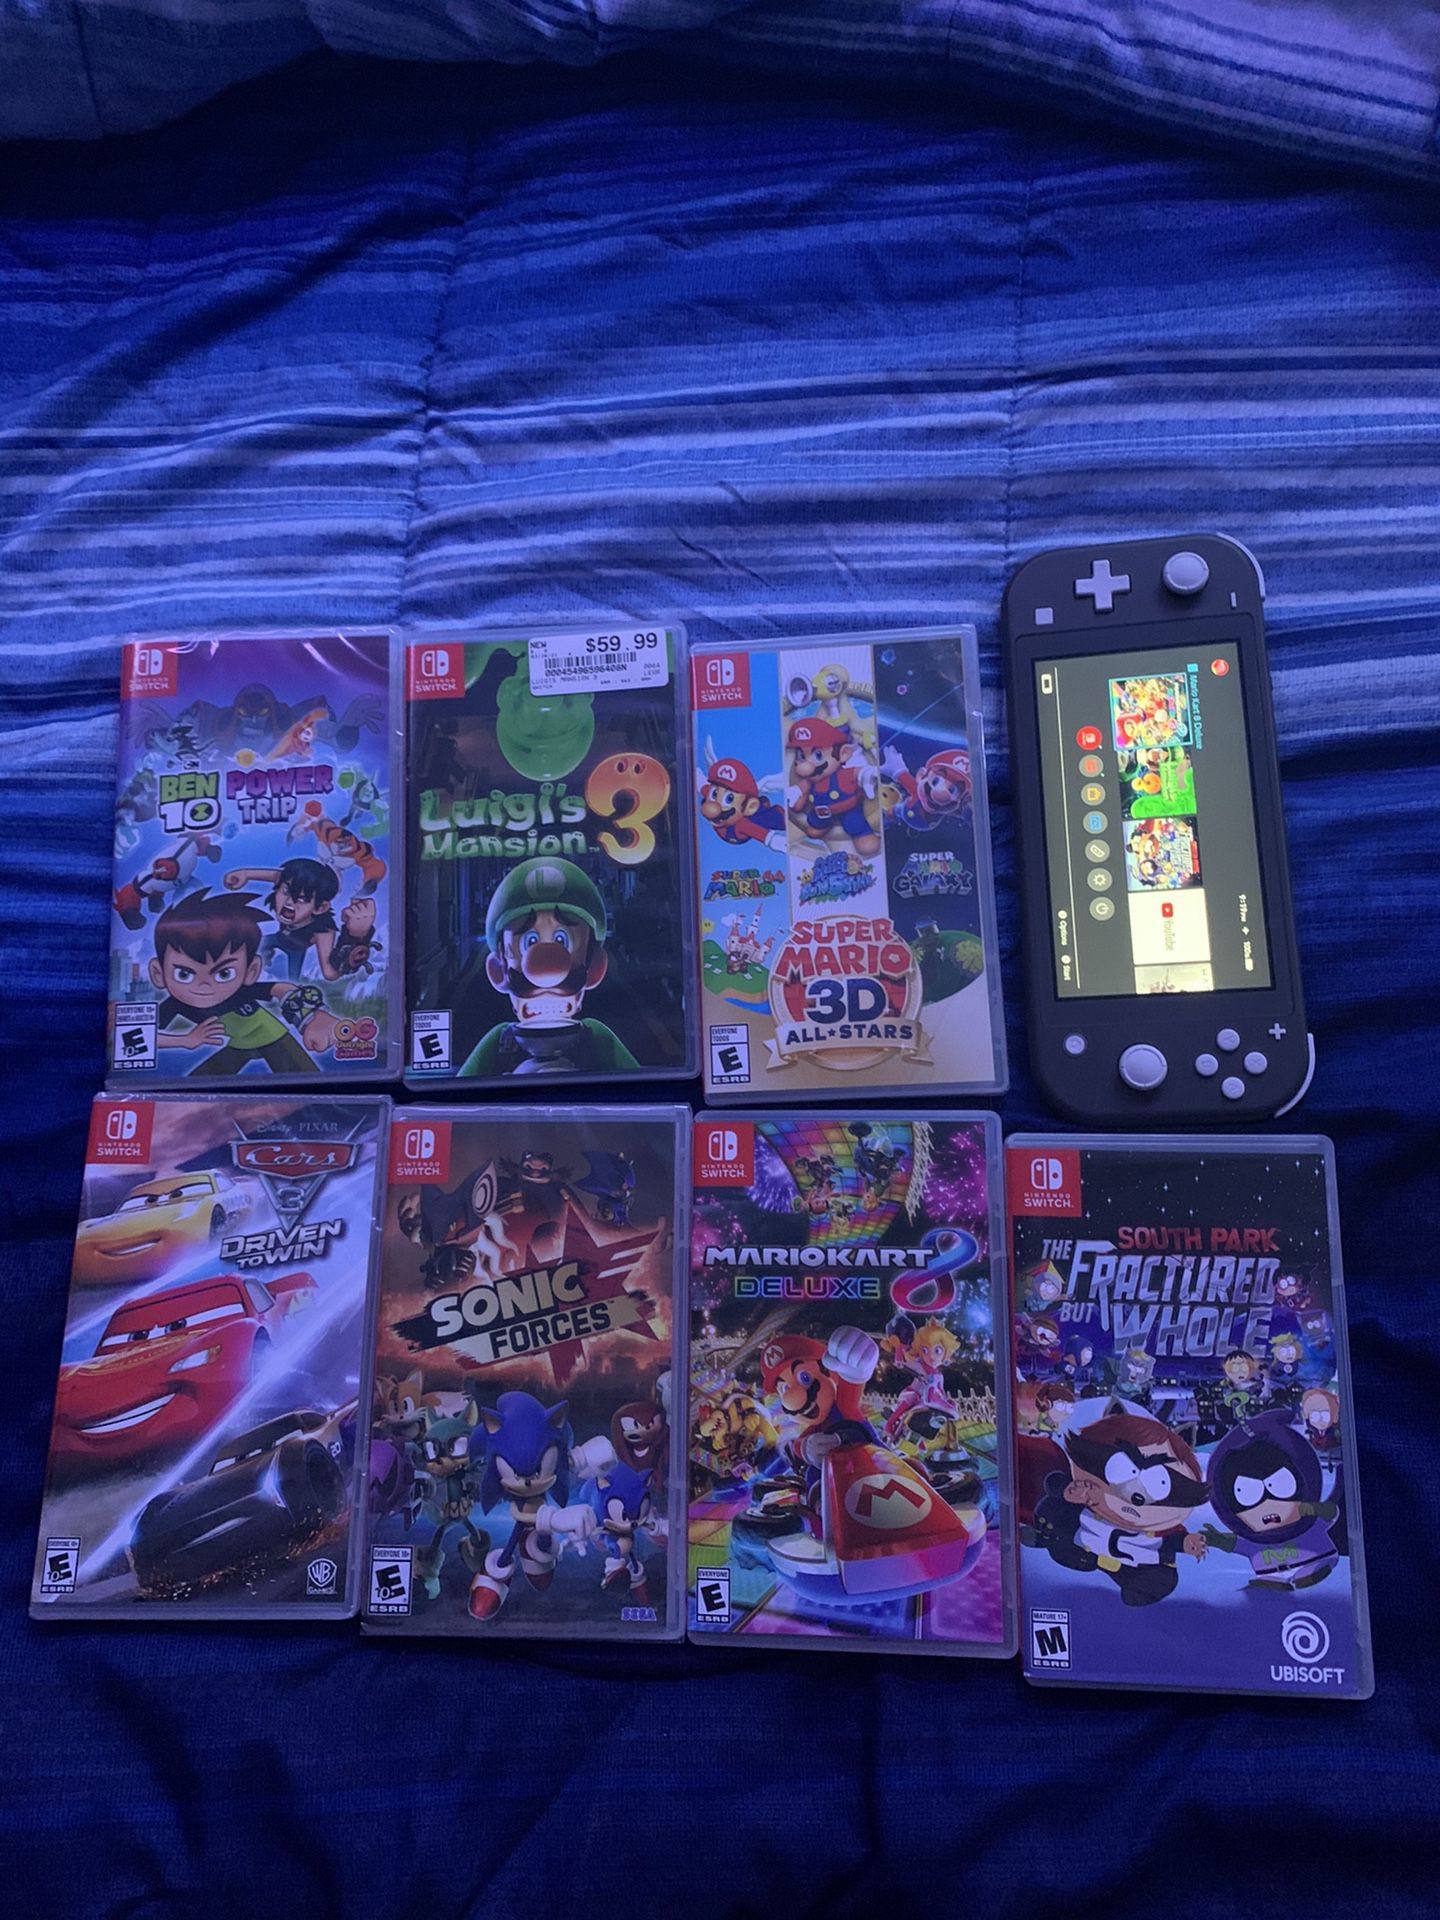 Nintendo Switch Comes With 8 Games Some Are Downloaded Already And Comes With Case And Charger